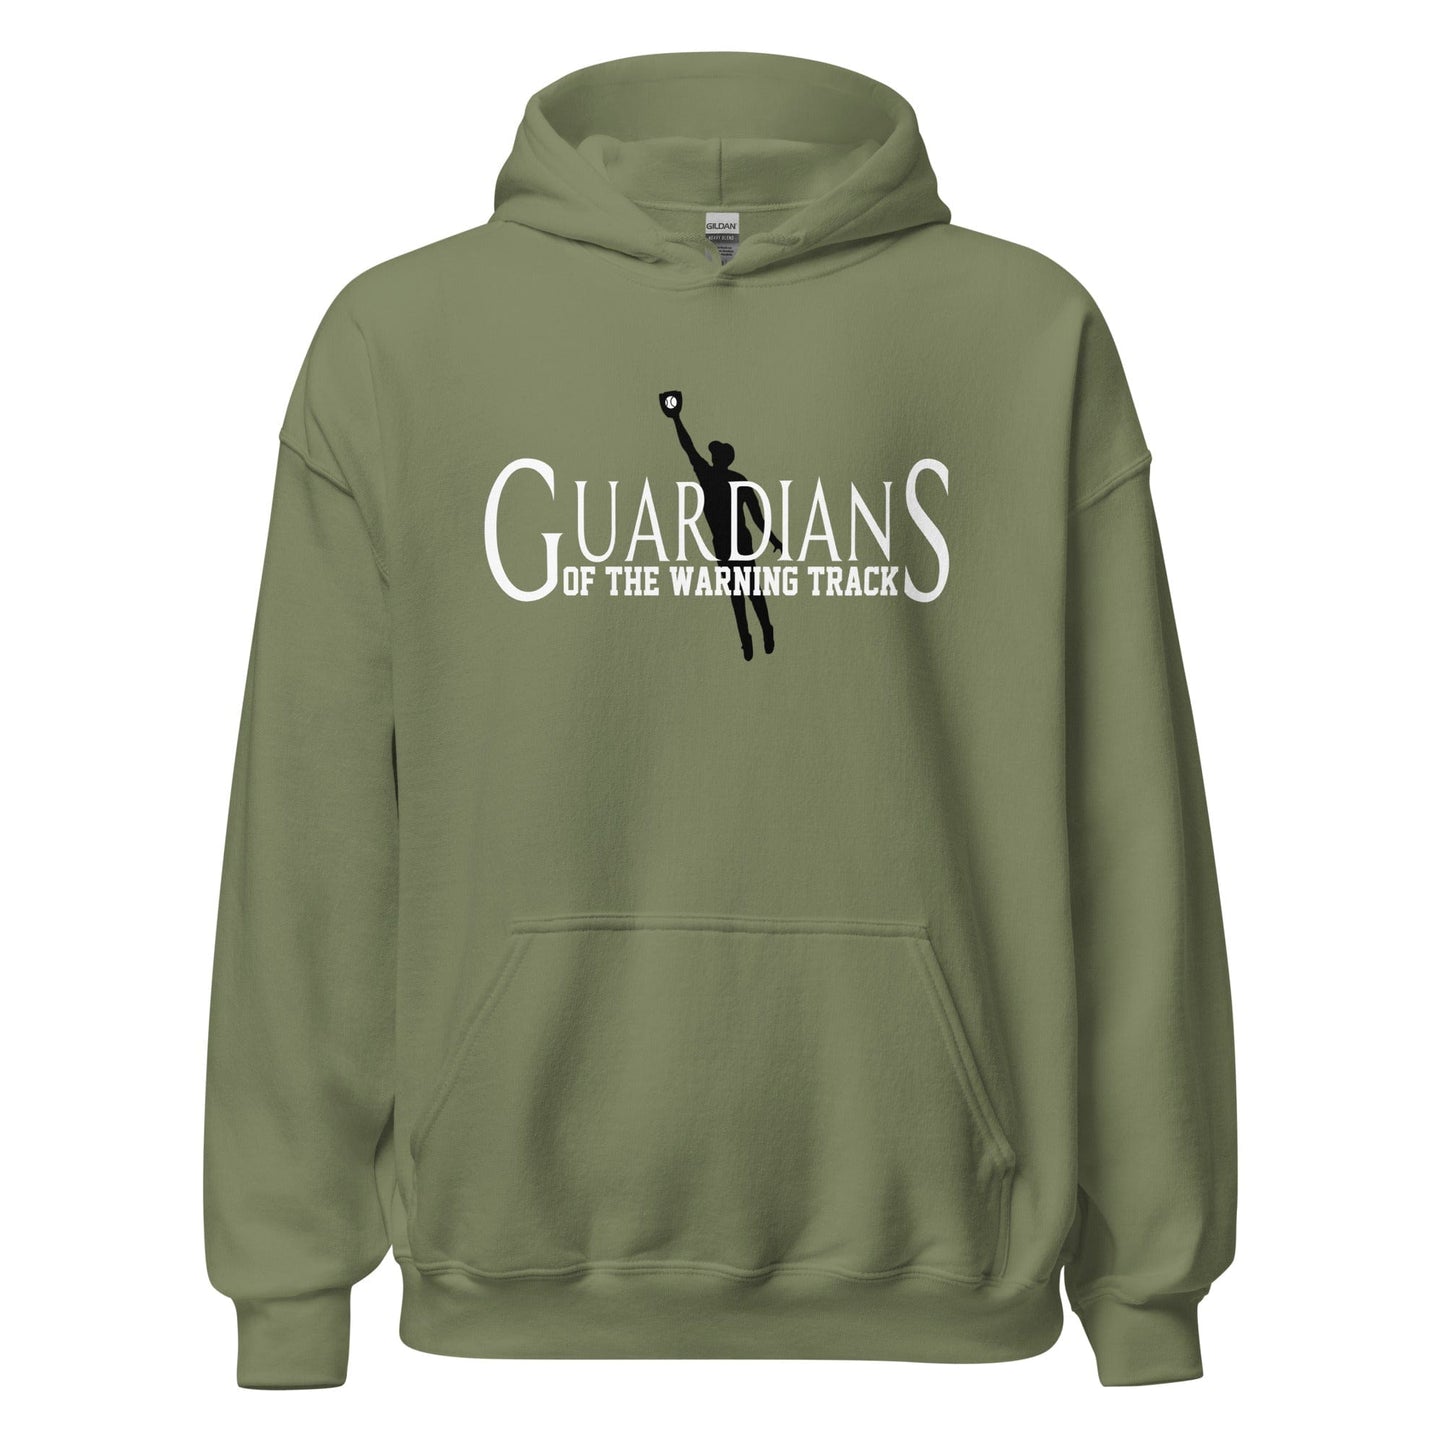 Guardians Of The Warning Track - Adult Hoodie